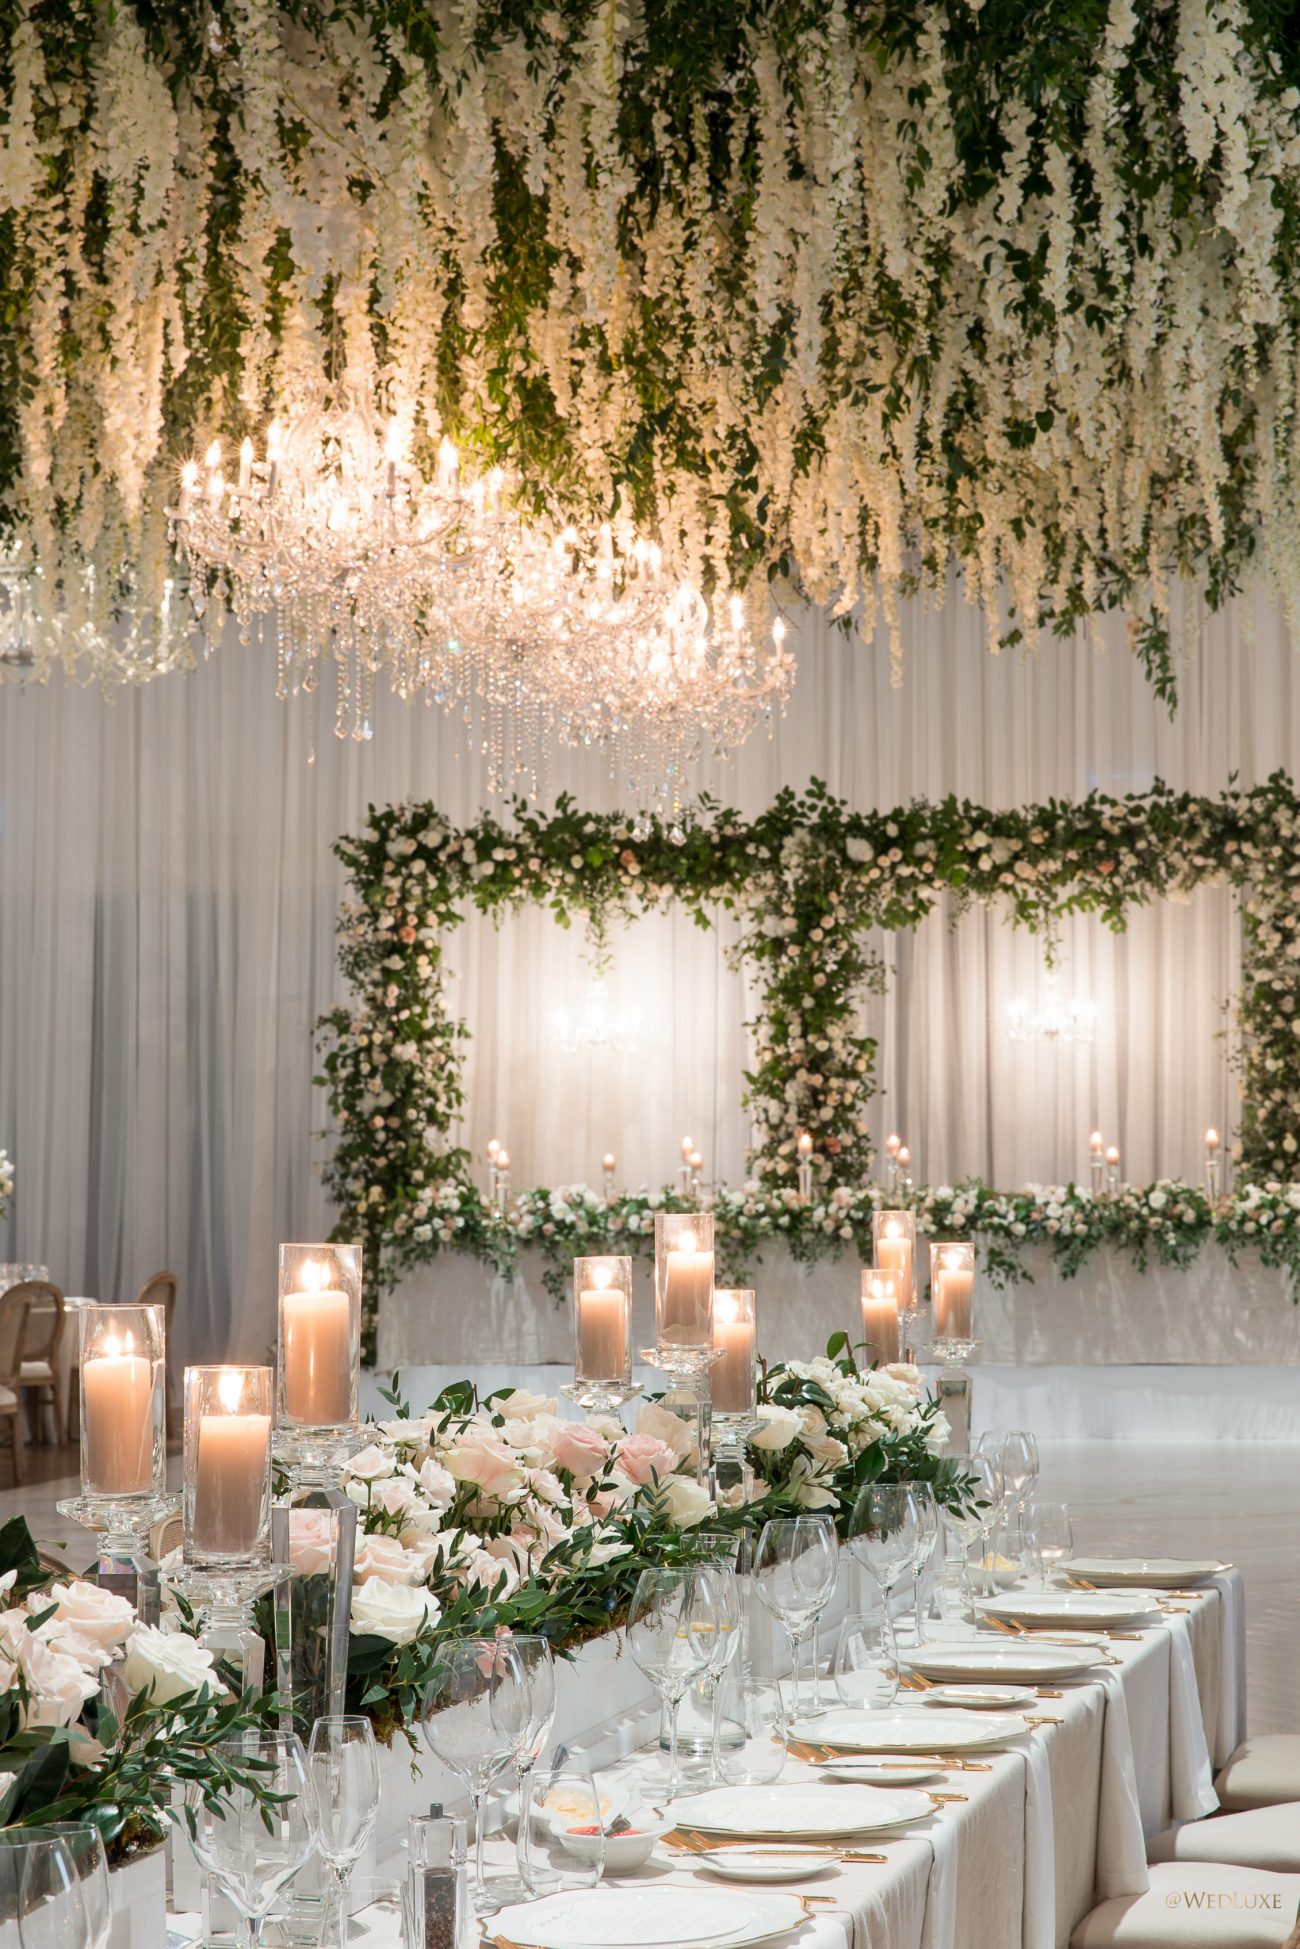 Stunning wedding decor with hanging wisteria blooms